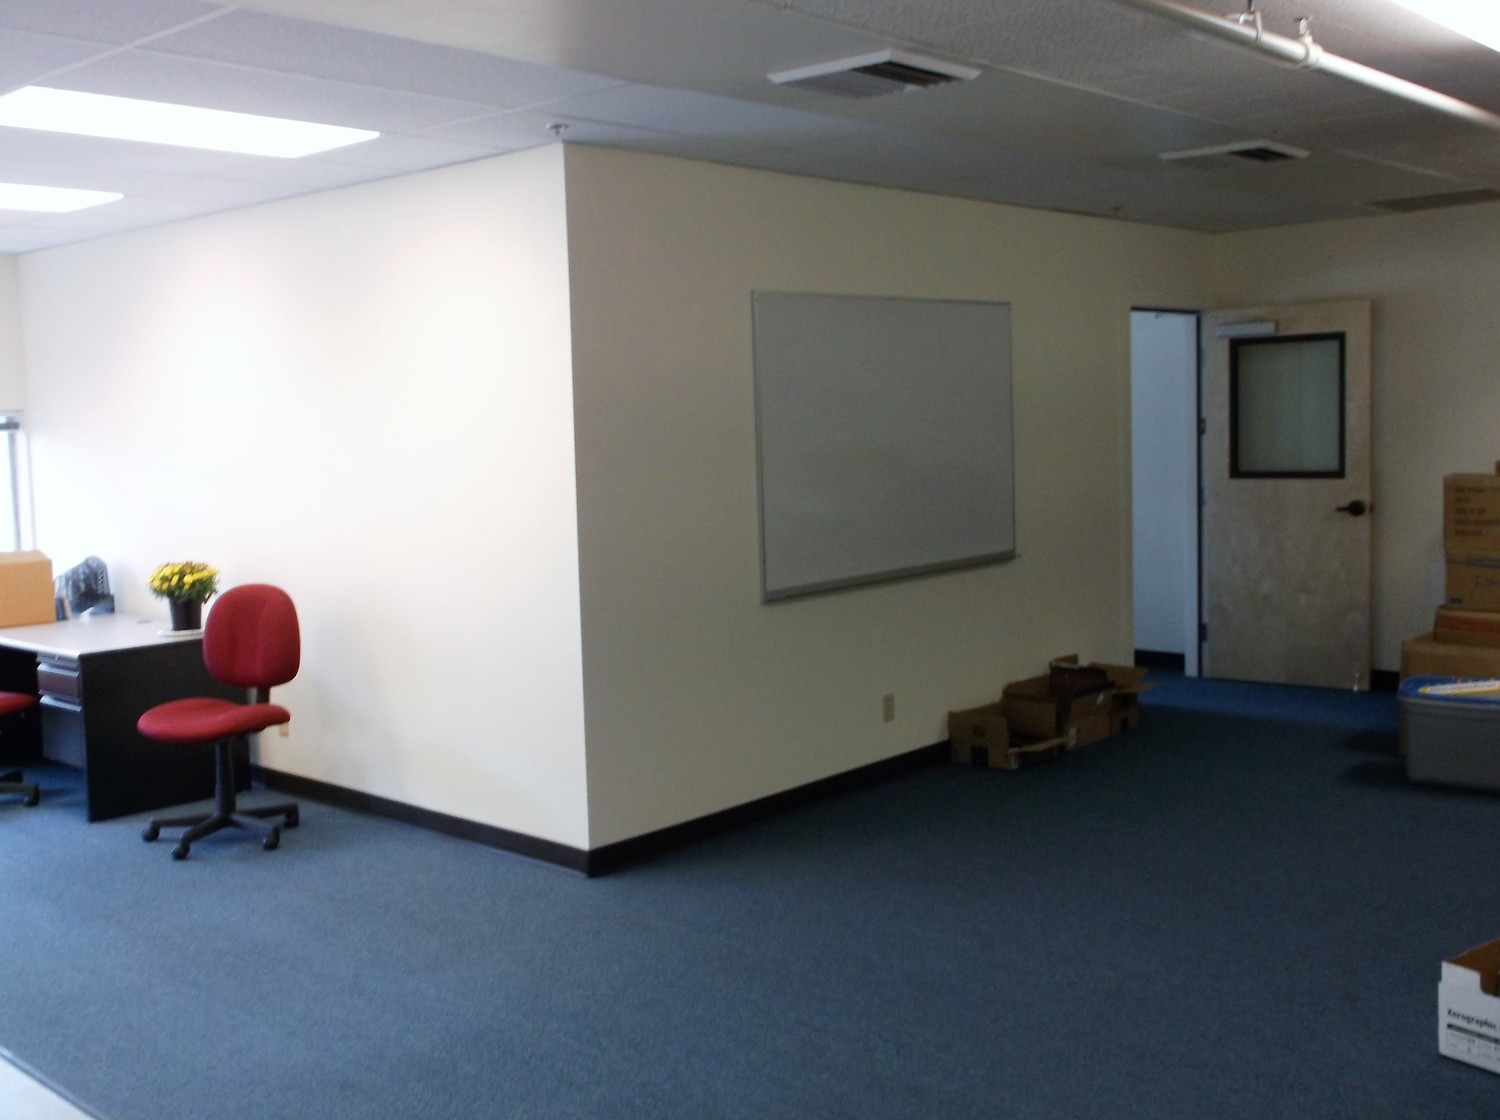 Inside office with white walls and blue carpet